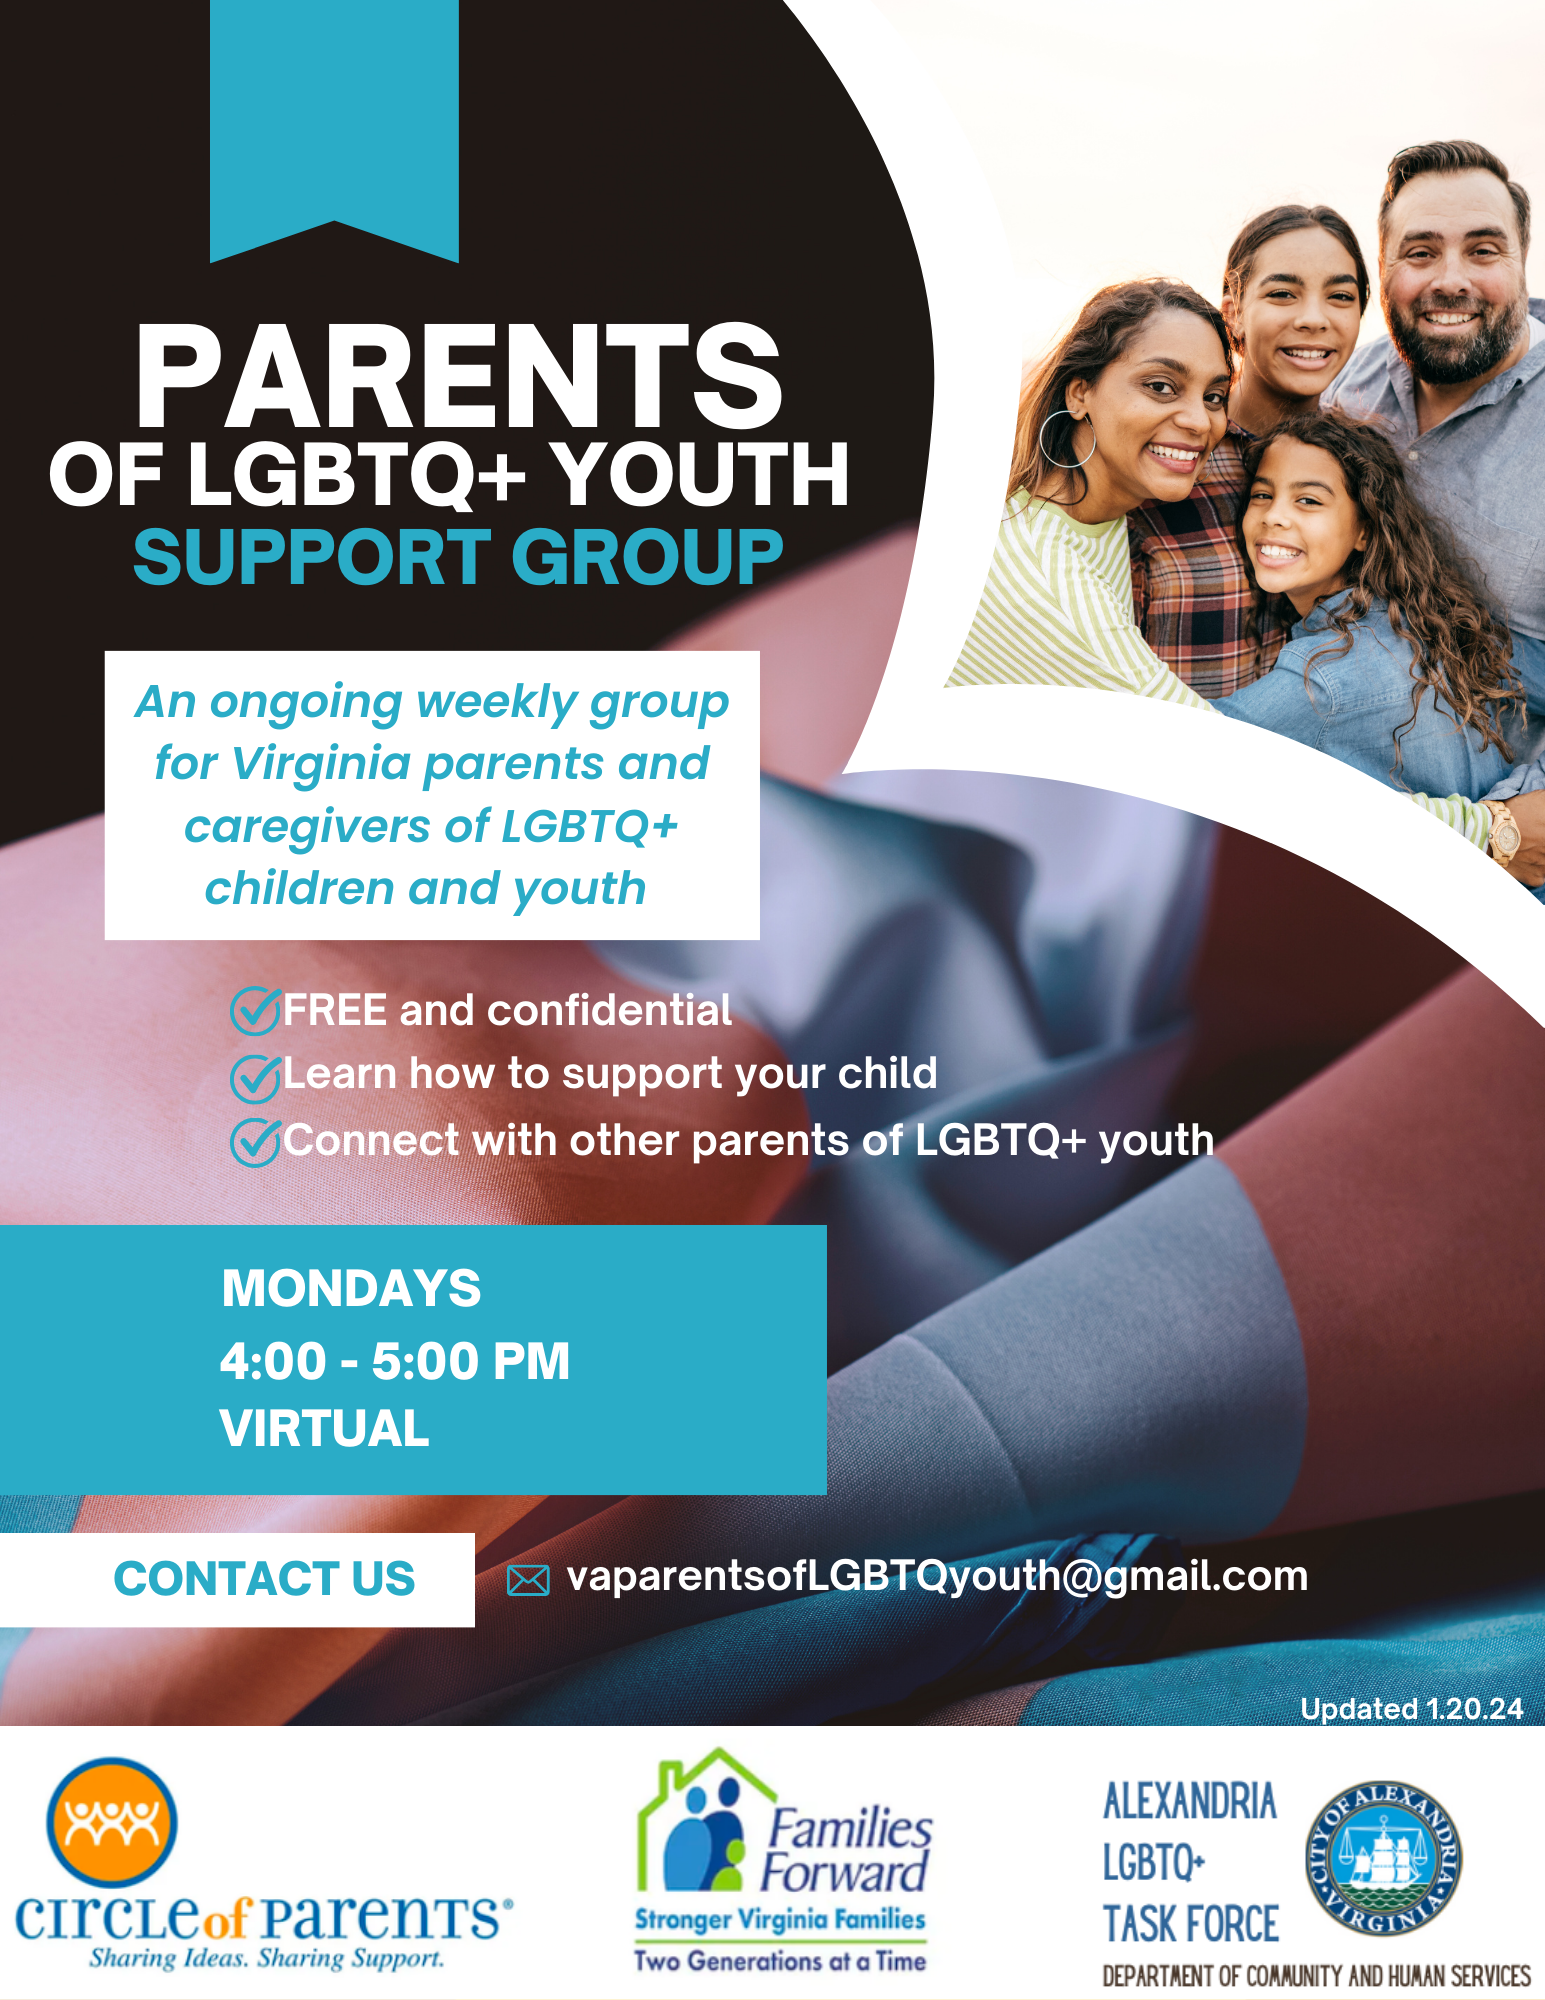 Parents of LGBTQ+ Youth Support Group